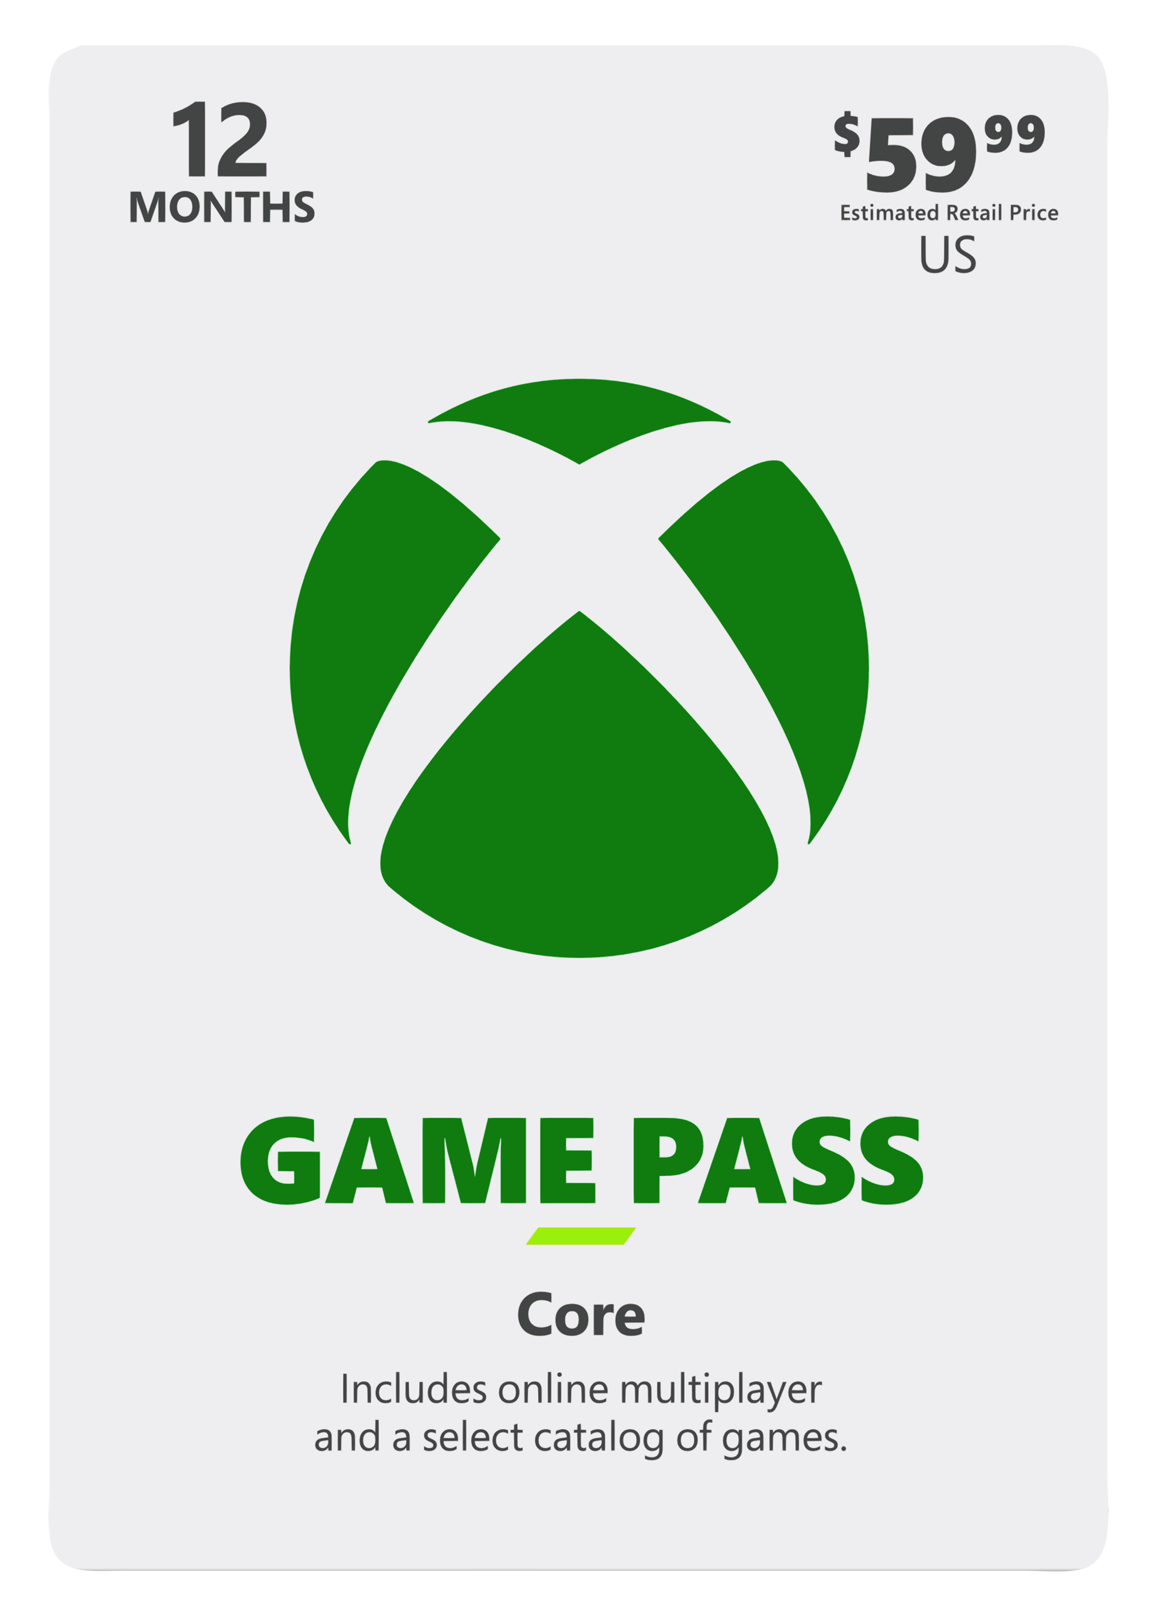 Xbox Game Pass Ultimate 12 months. Purchase cheaper!